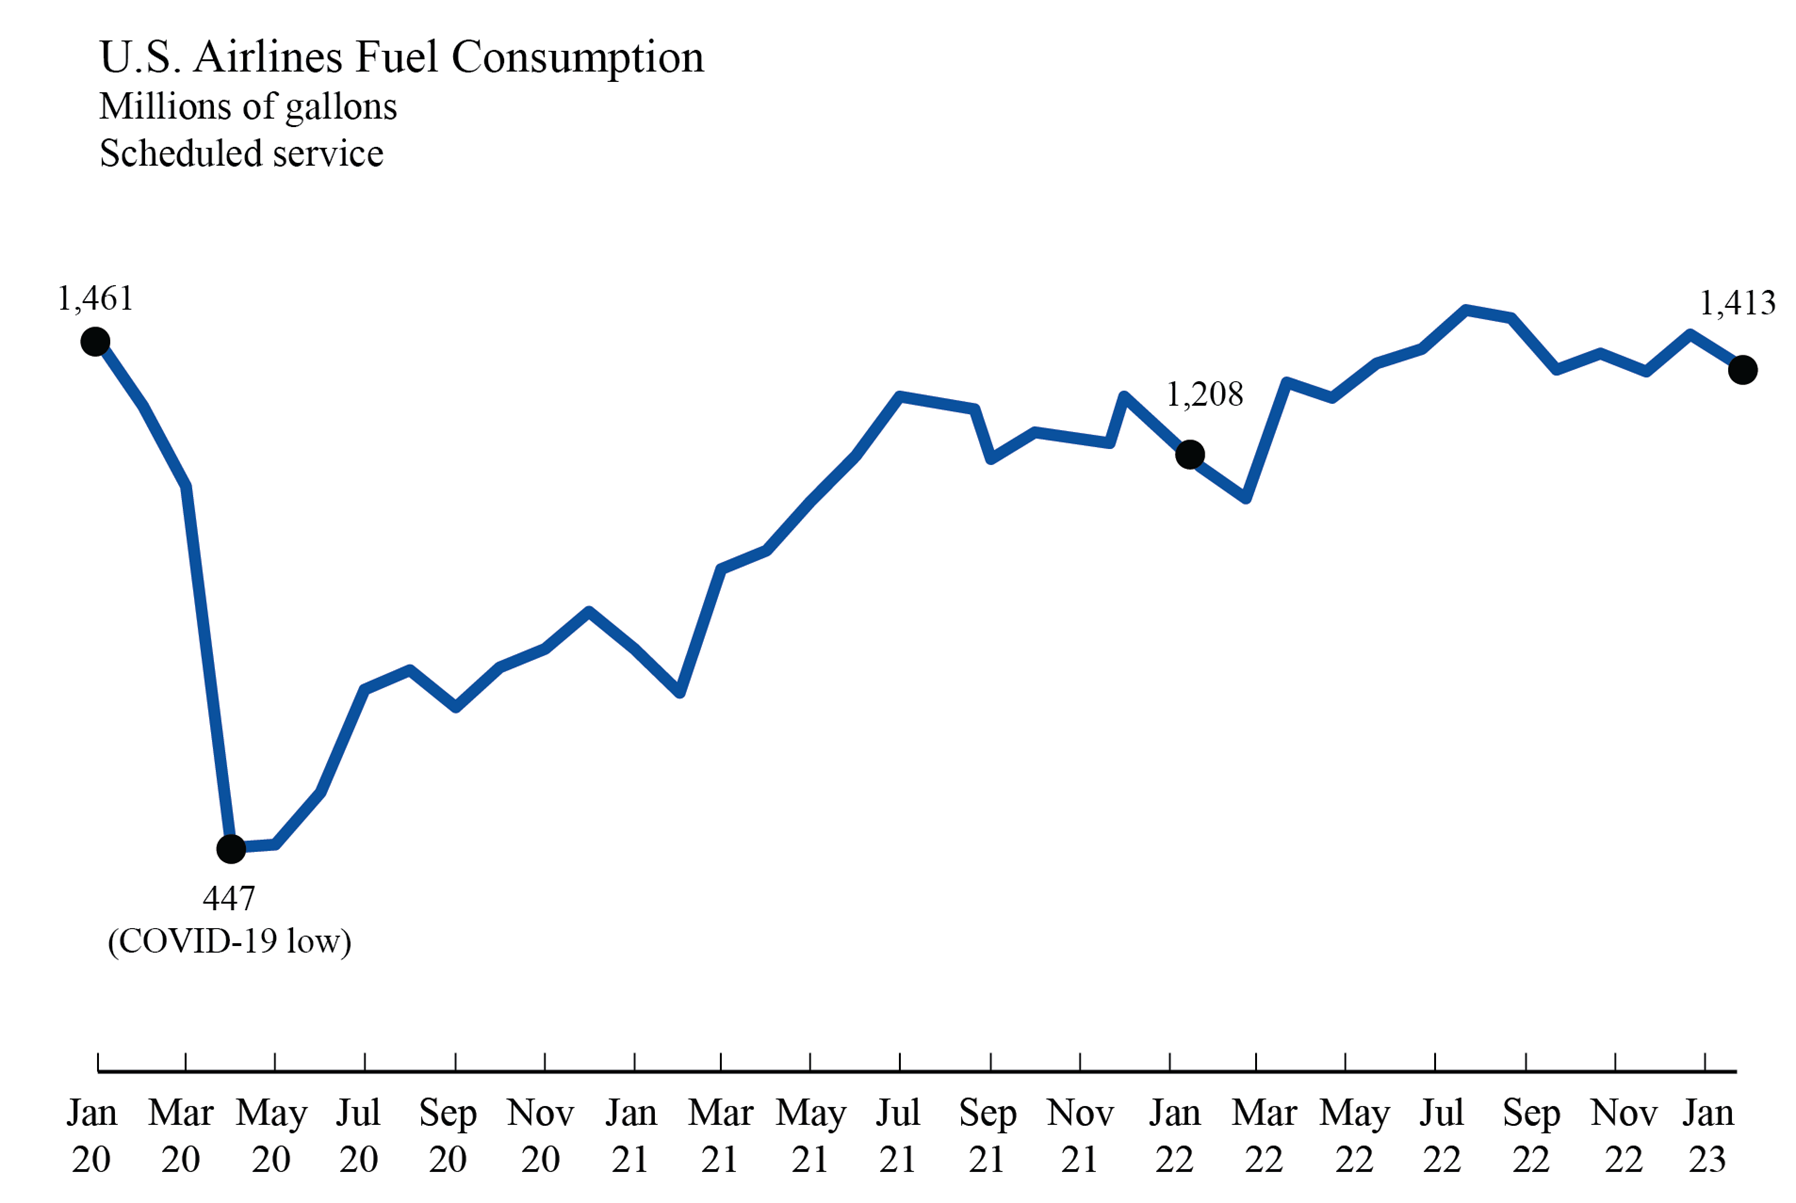 U.S. Airlines’ January 2023 Fuel Cost per Gallon Up 4.3 from December